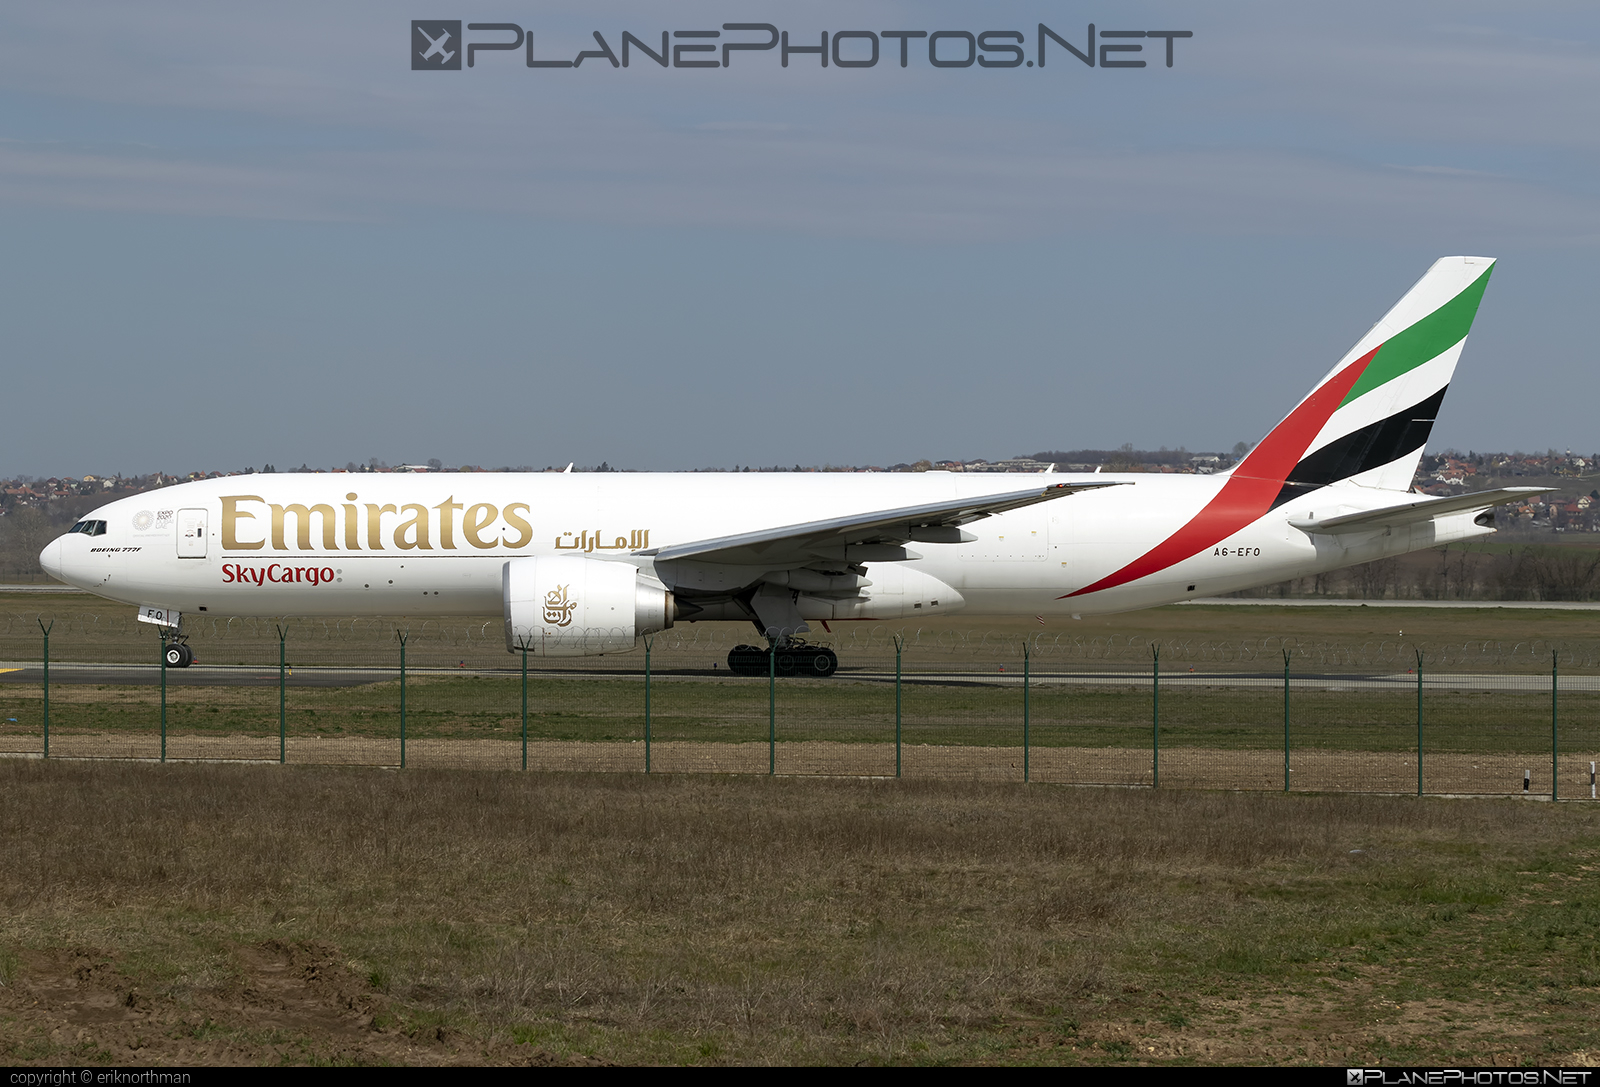 Boeing 777F - A6-EFO operated by Emirates SkyCargo #b777 #b777f #b777freighter #boeing #boeing777 #tripleseven